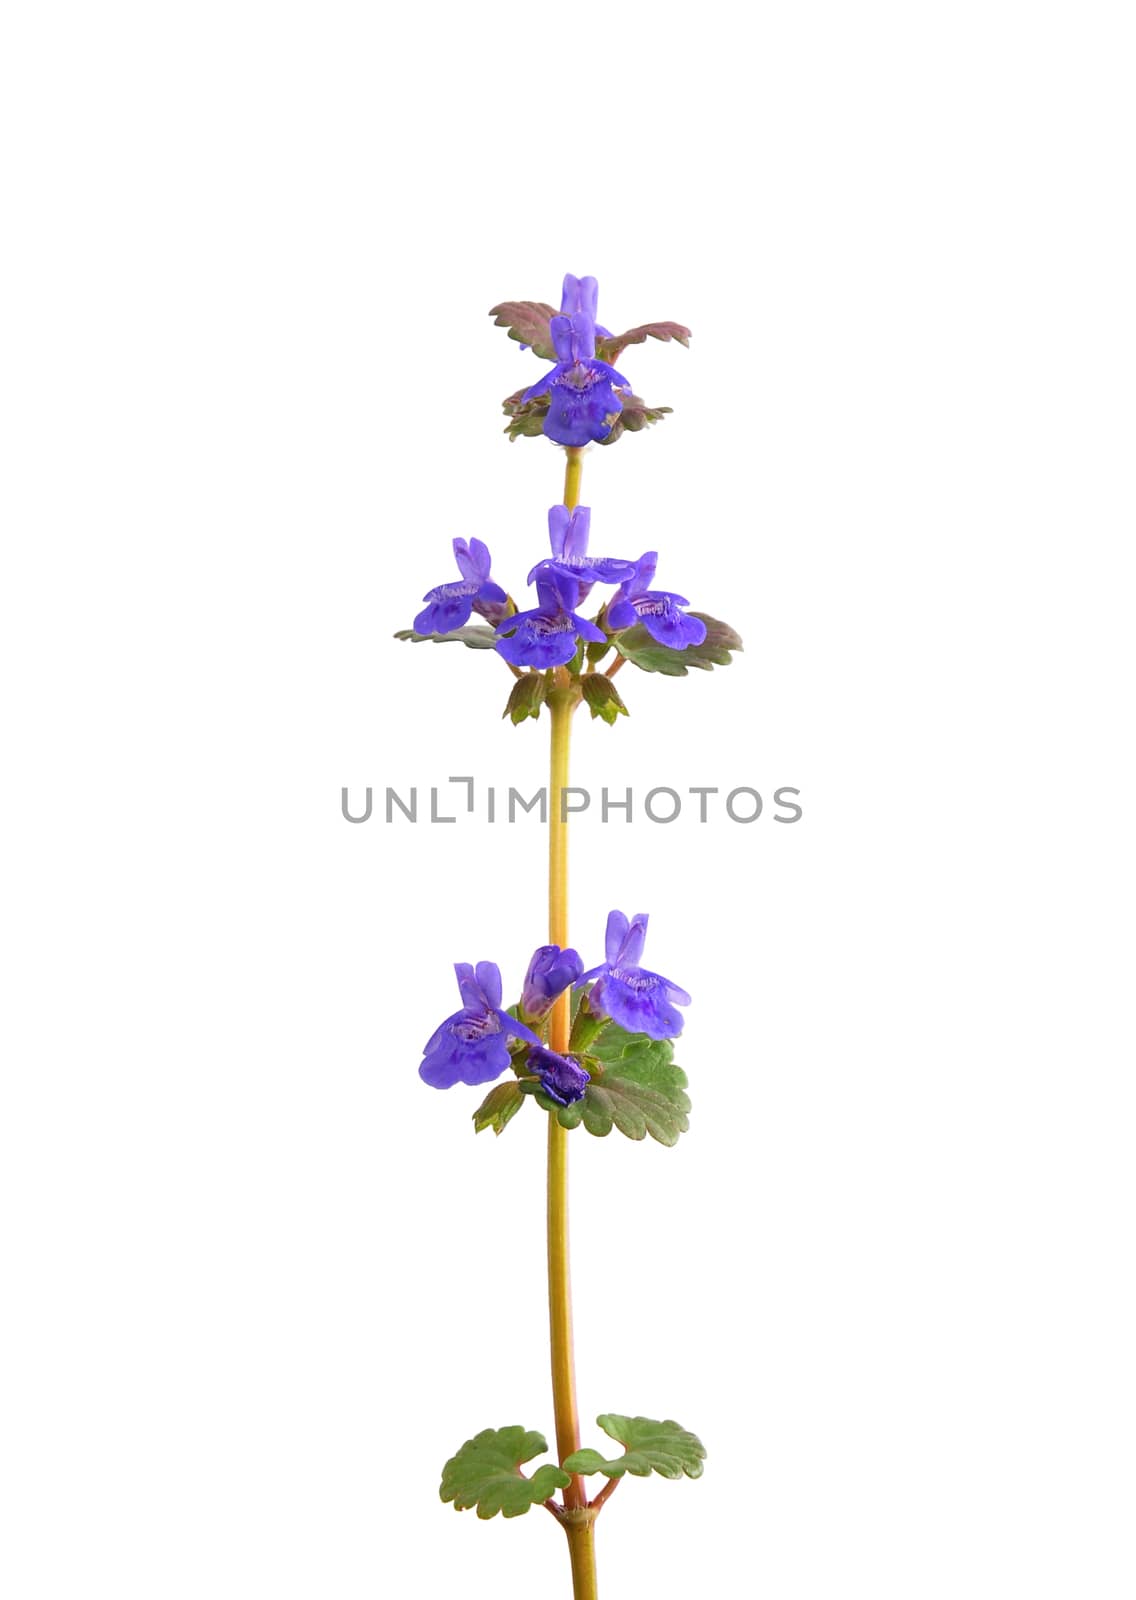 Ground-ivy (Glechoma hederacea) by rbiedermann